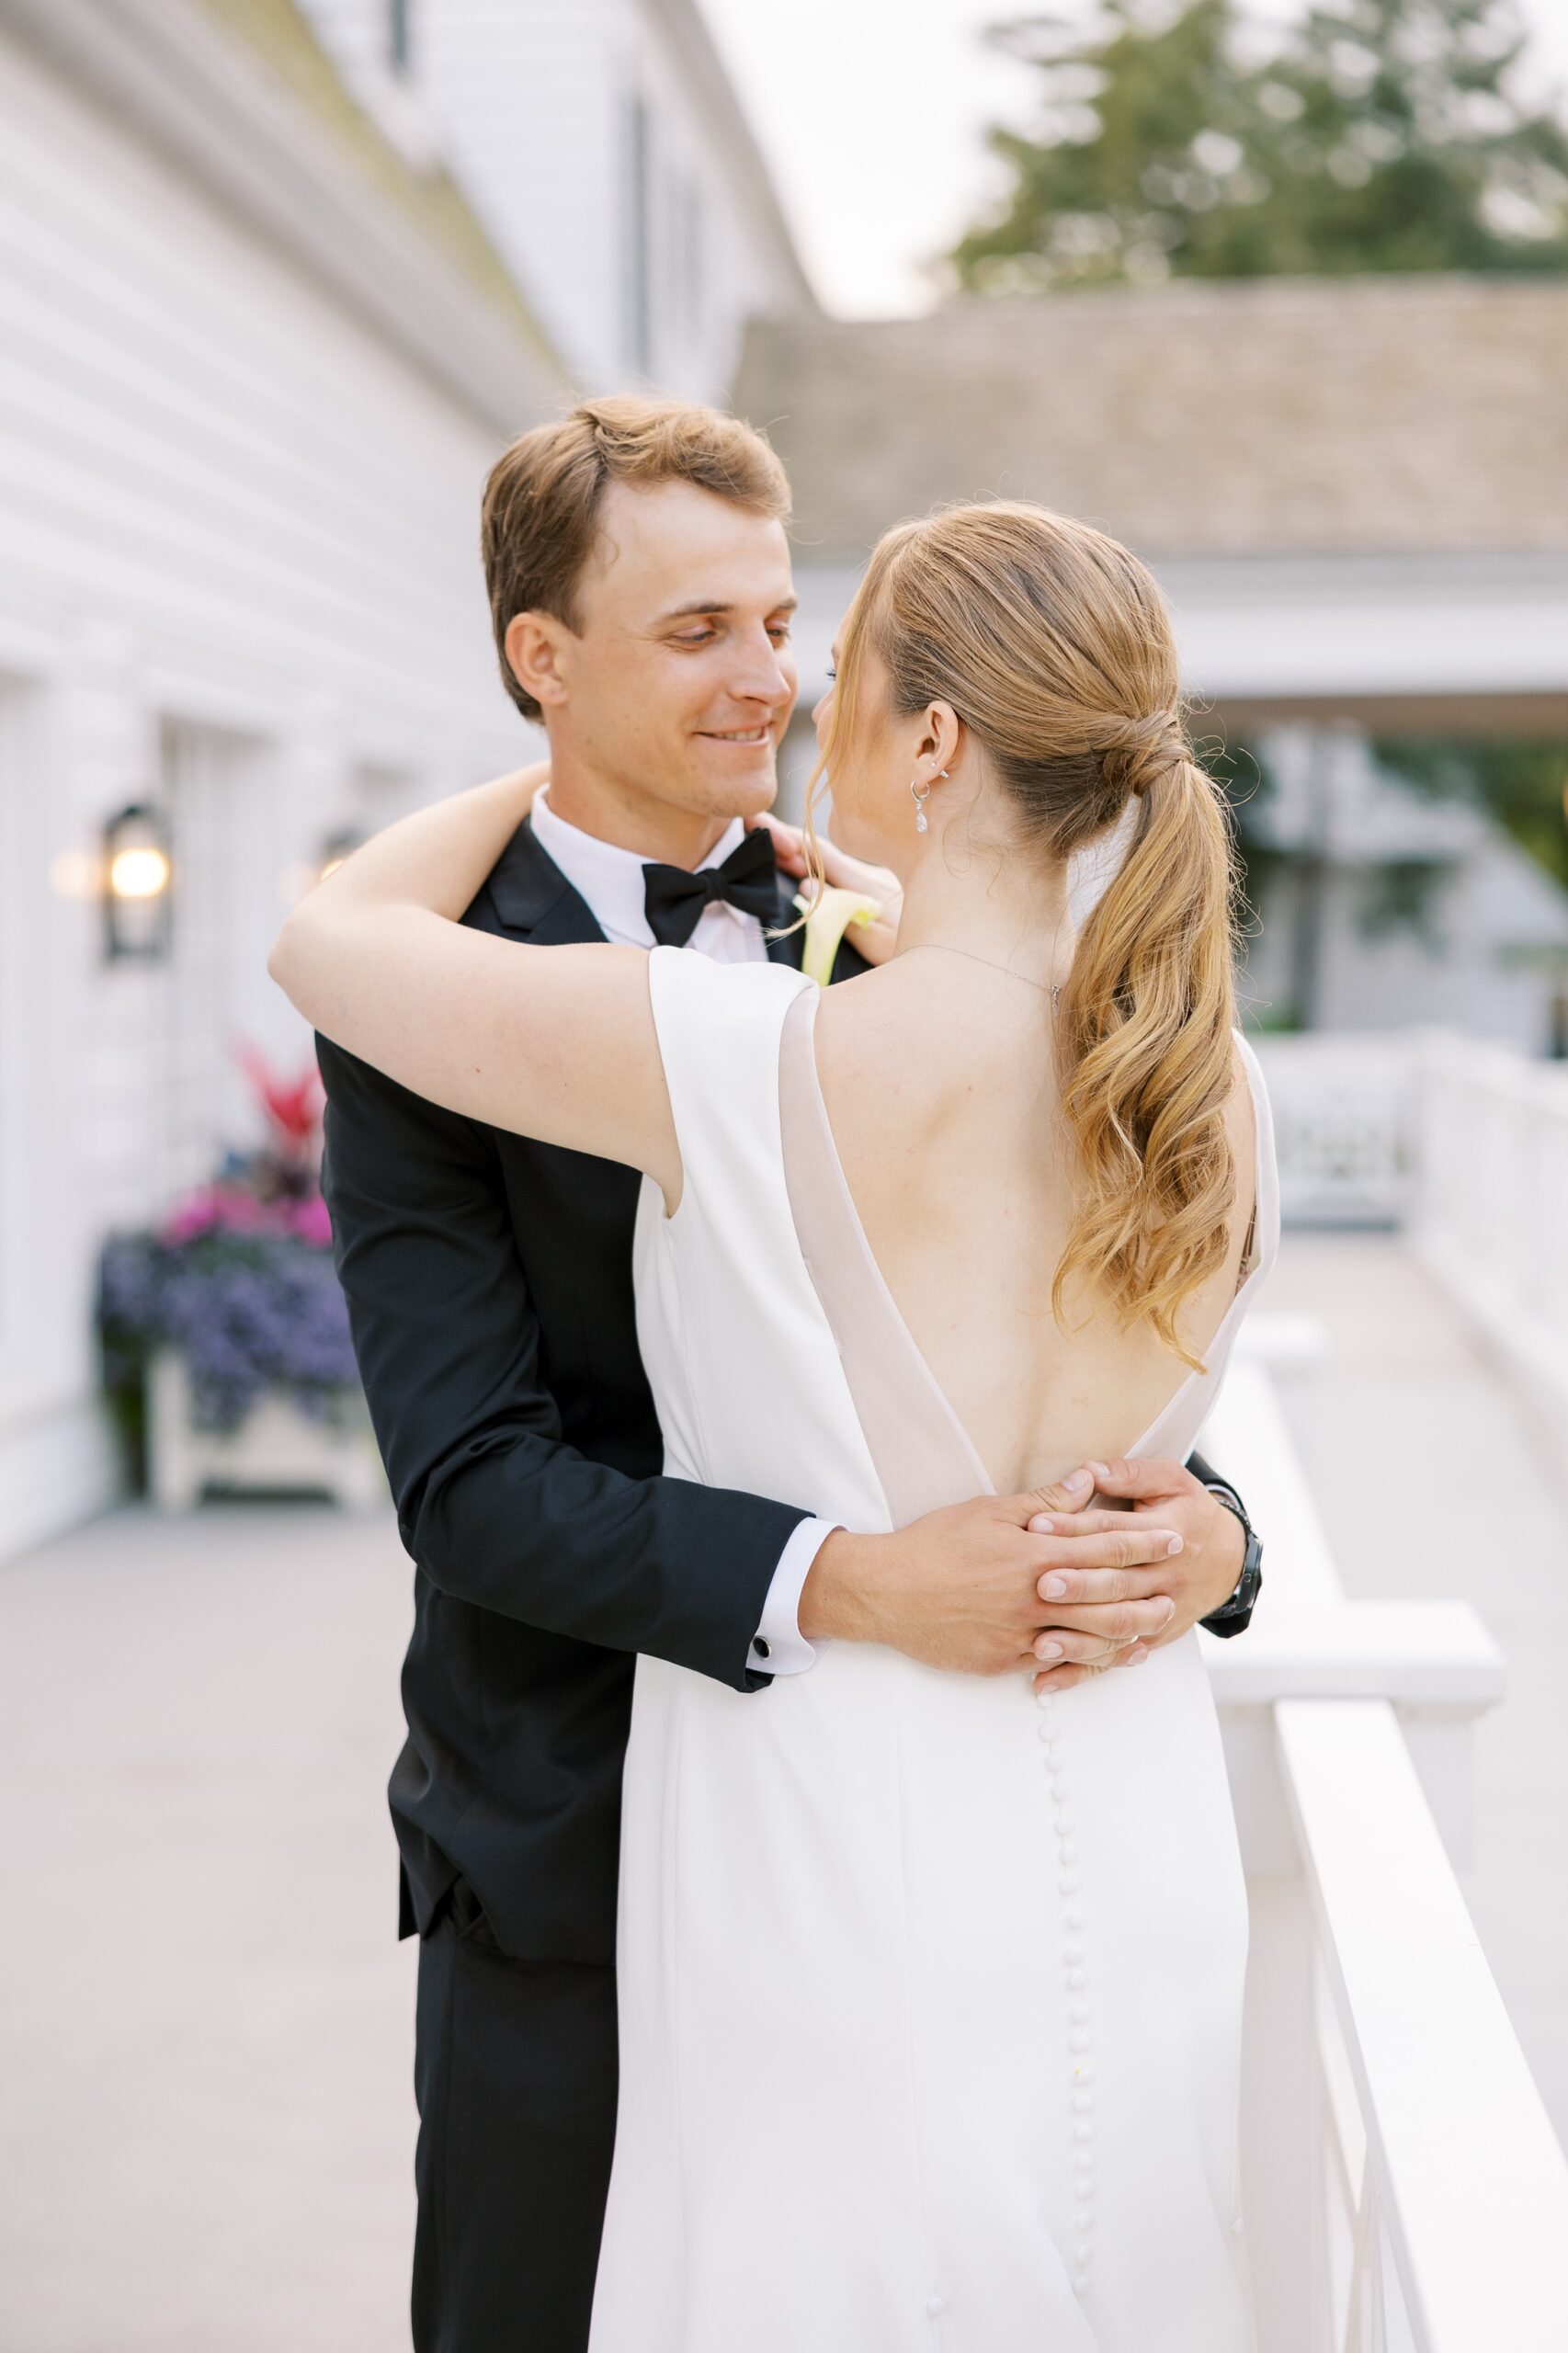 The bride and groom hugged before their Westmoreland Country Club wedding reception